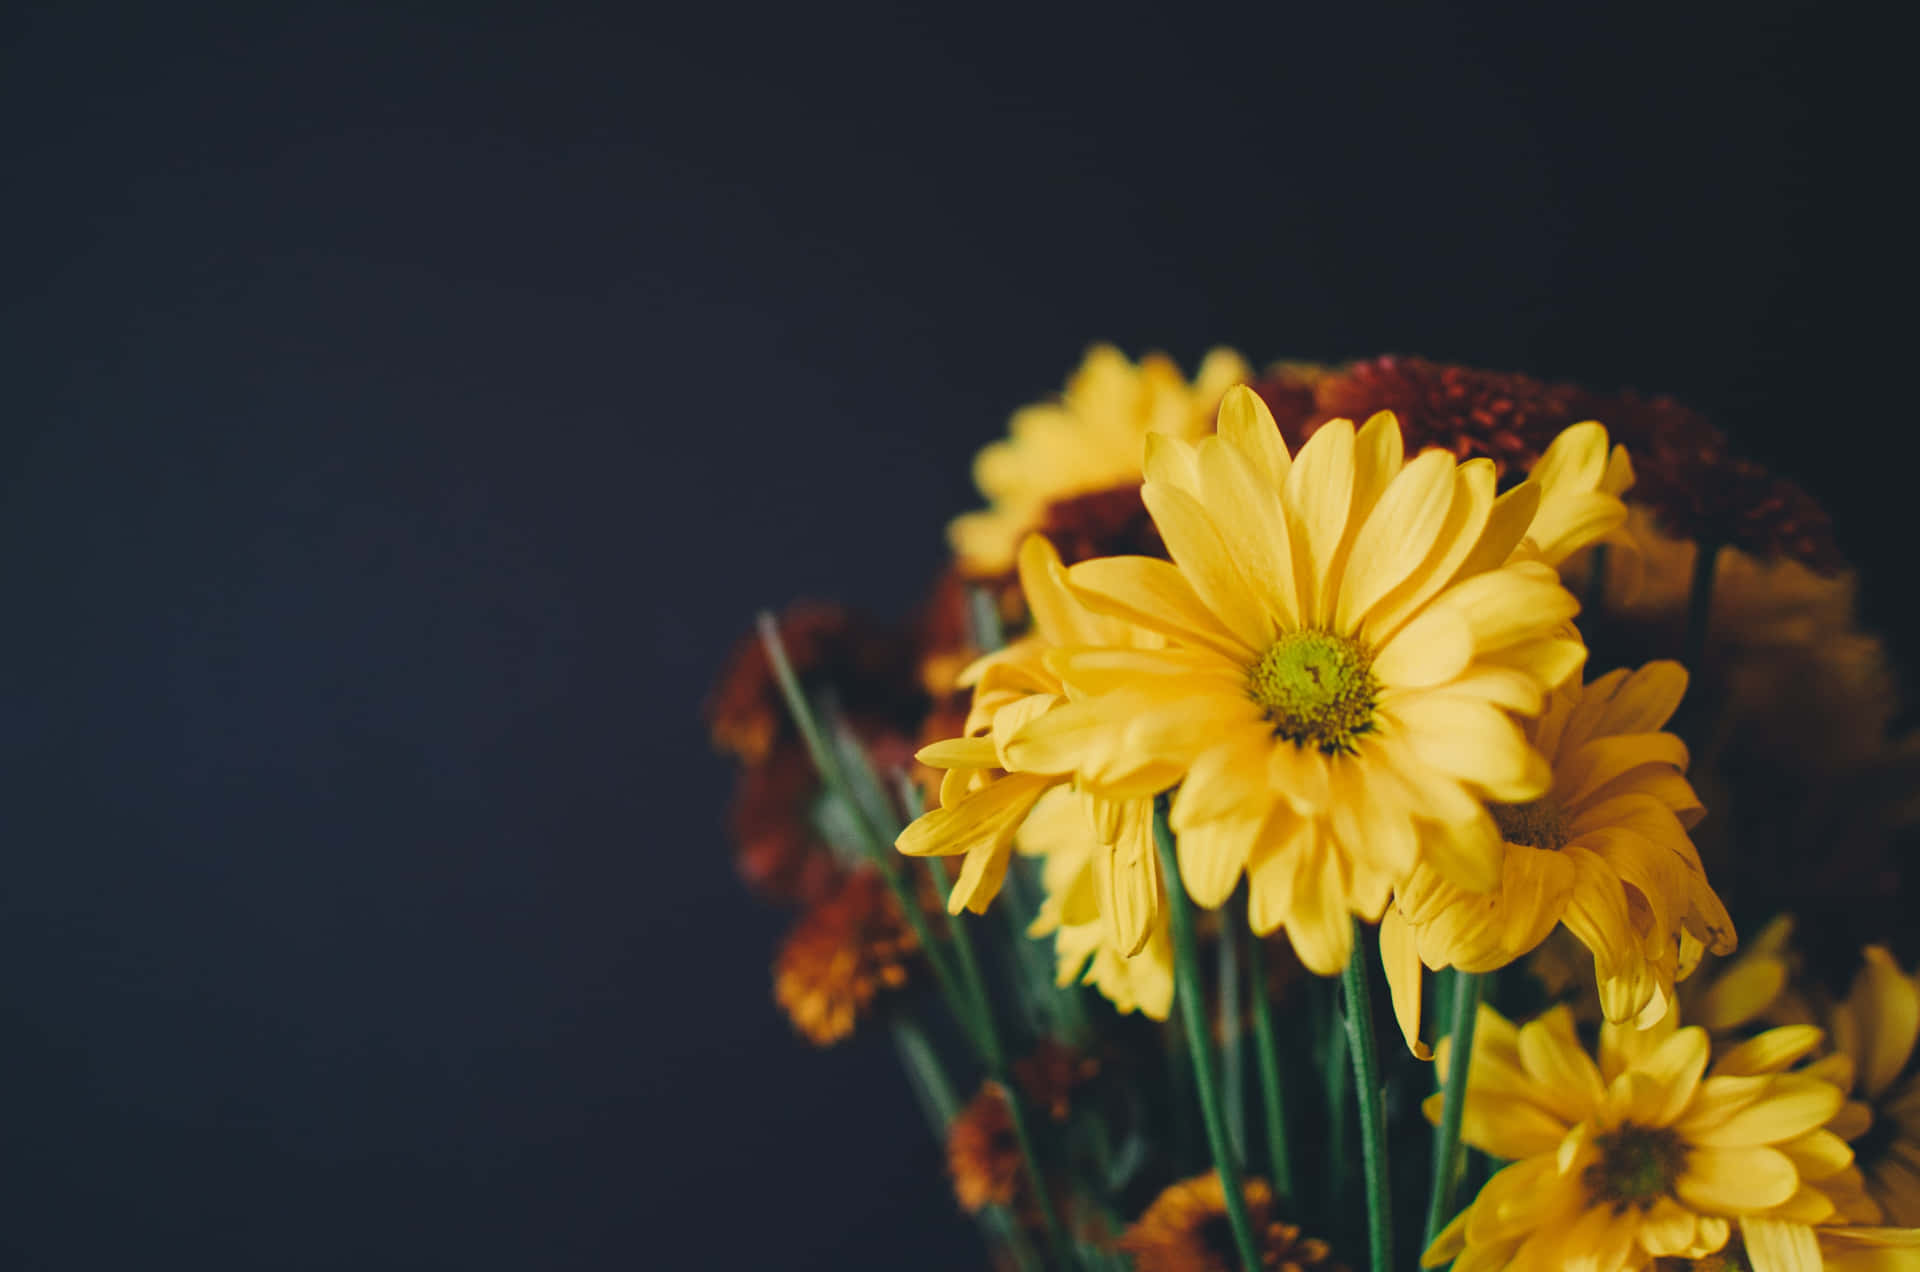 A vibrant yellow daisy in full bloom Wallpaper